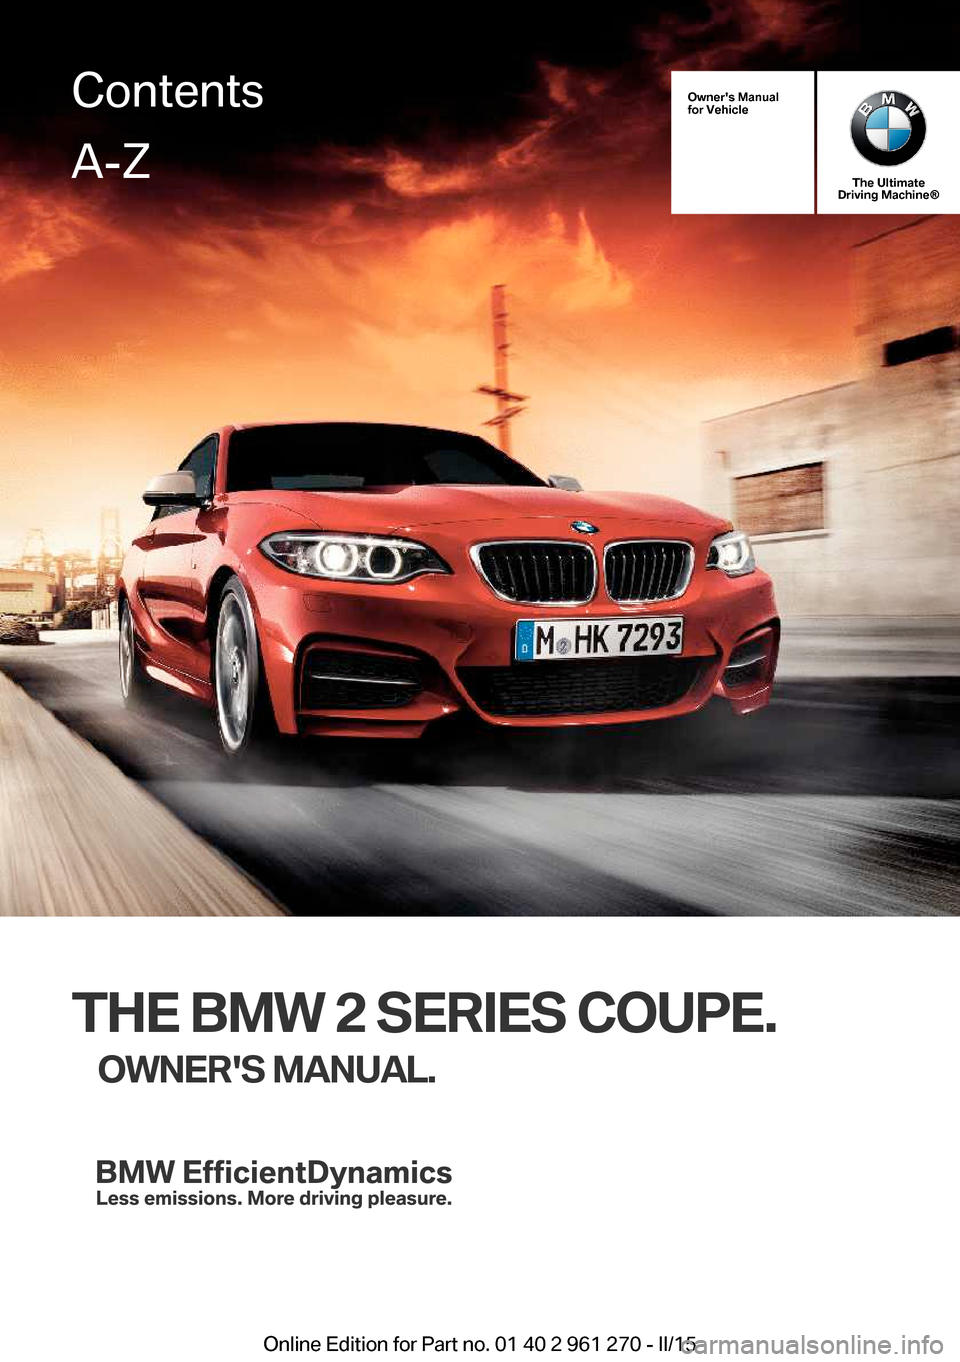 BMW 2 SERIES COUPE 2016 F22 Owners Manual Owners Manual
for Vehicle
The Ultimate
Driving Machine®
THE BMW 2 SERIES COUPE.
OWNERS MANUAL.
ContentsA-Z
Online Edition for Part no. 01 40 2 961 270 - II/15   